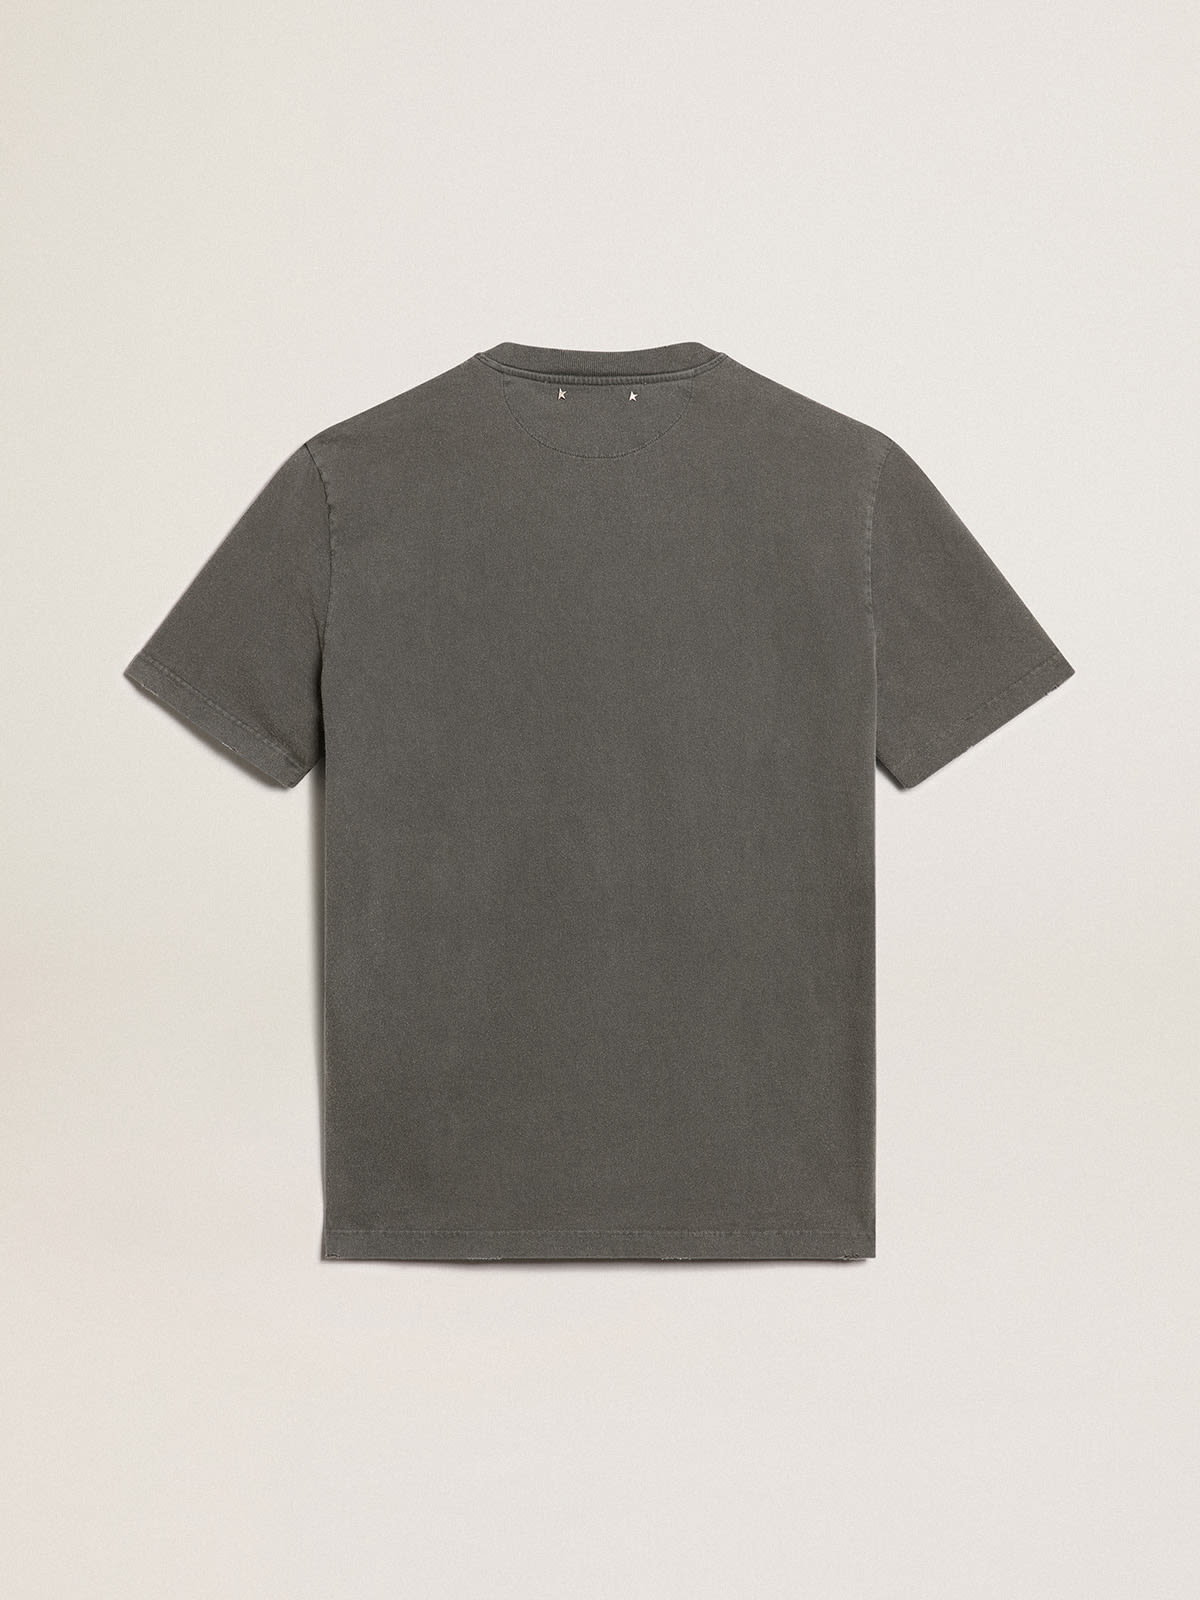 Golden Goose - Men's anthracite gray T-shirt with distressed treatment in 